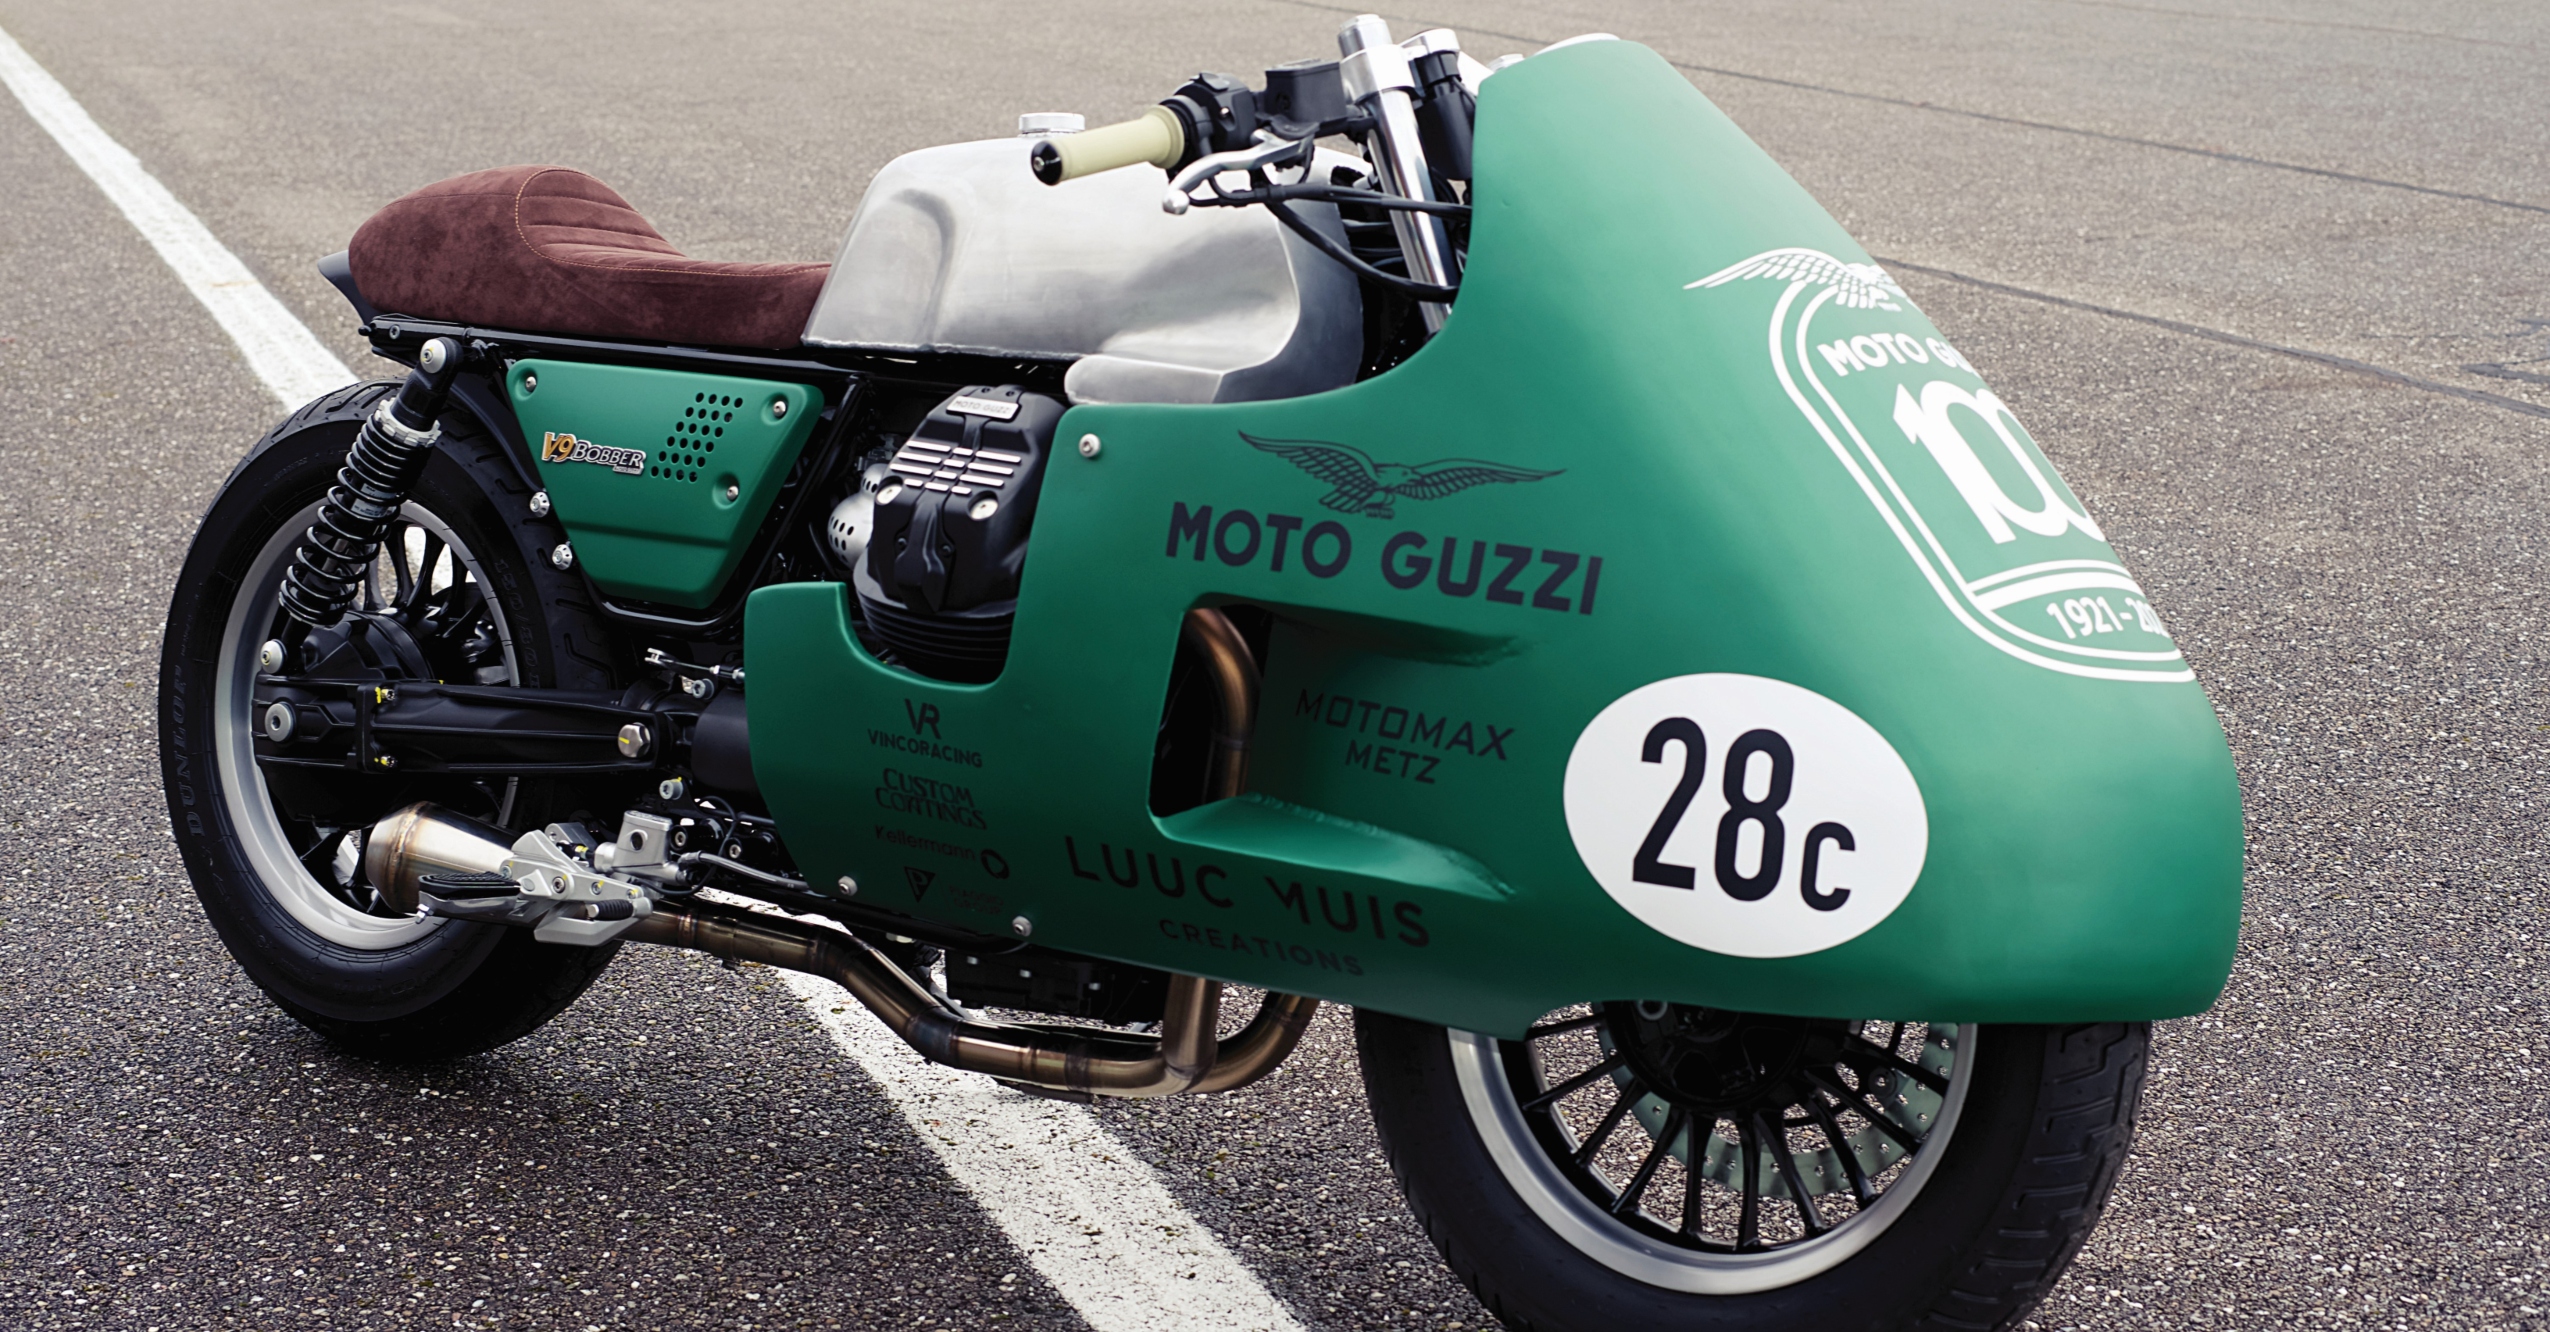 LM Creations’ Moto Guzzi V9 Bobber Was Inspired By An Iconic Racing Bike